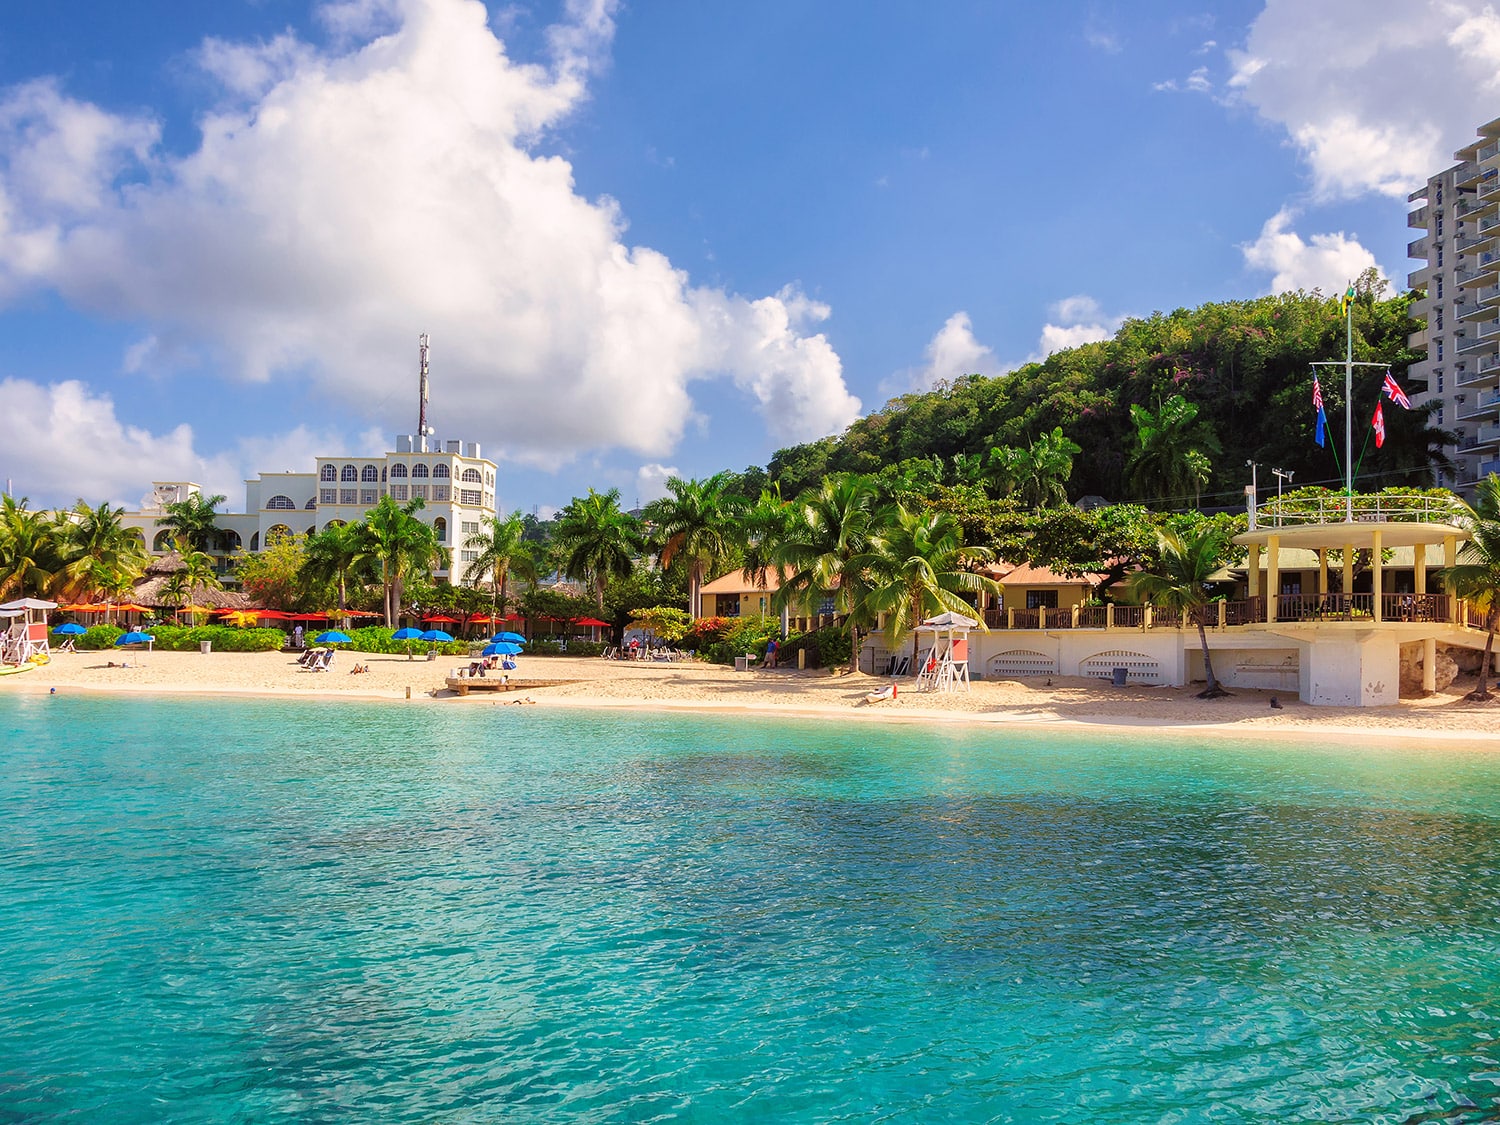 Montego Bay, Negril Or Ocho Rios: Which Jamaica Resort Area Is